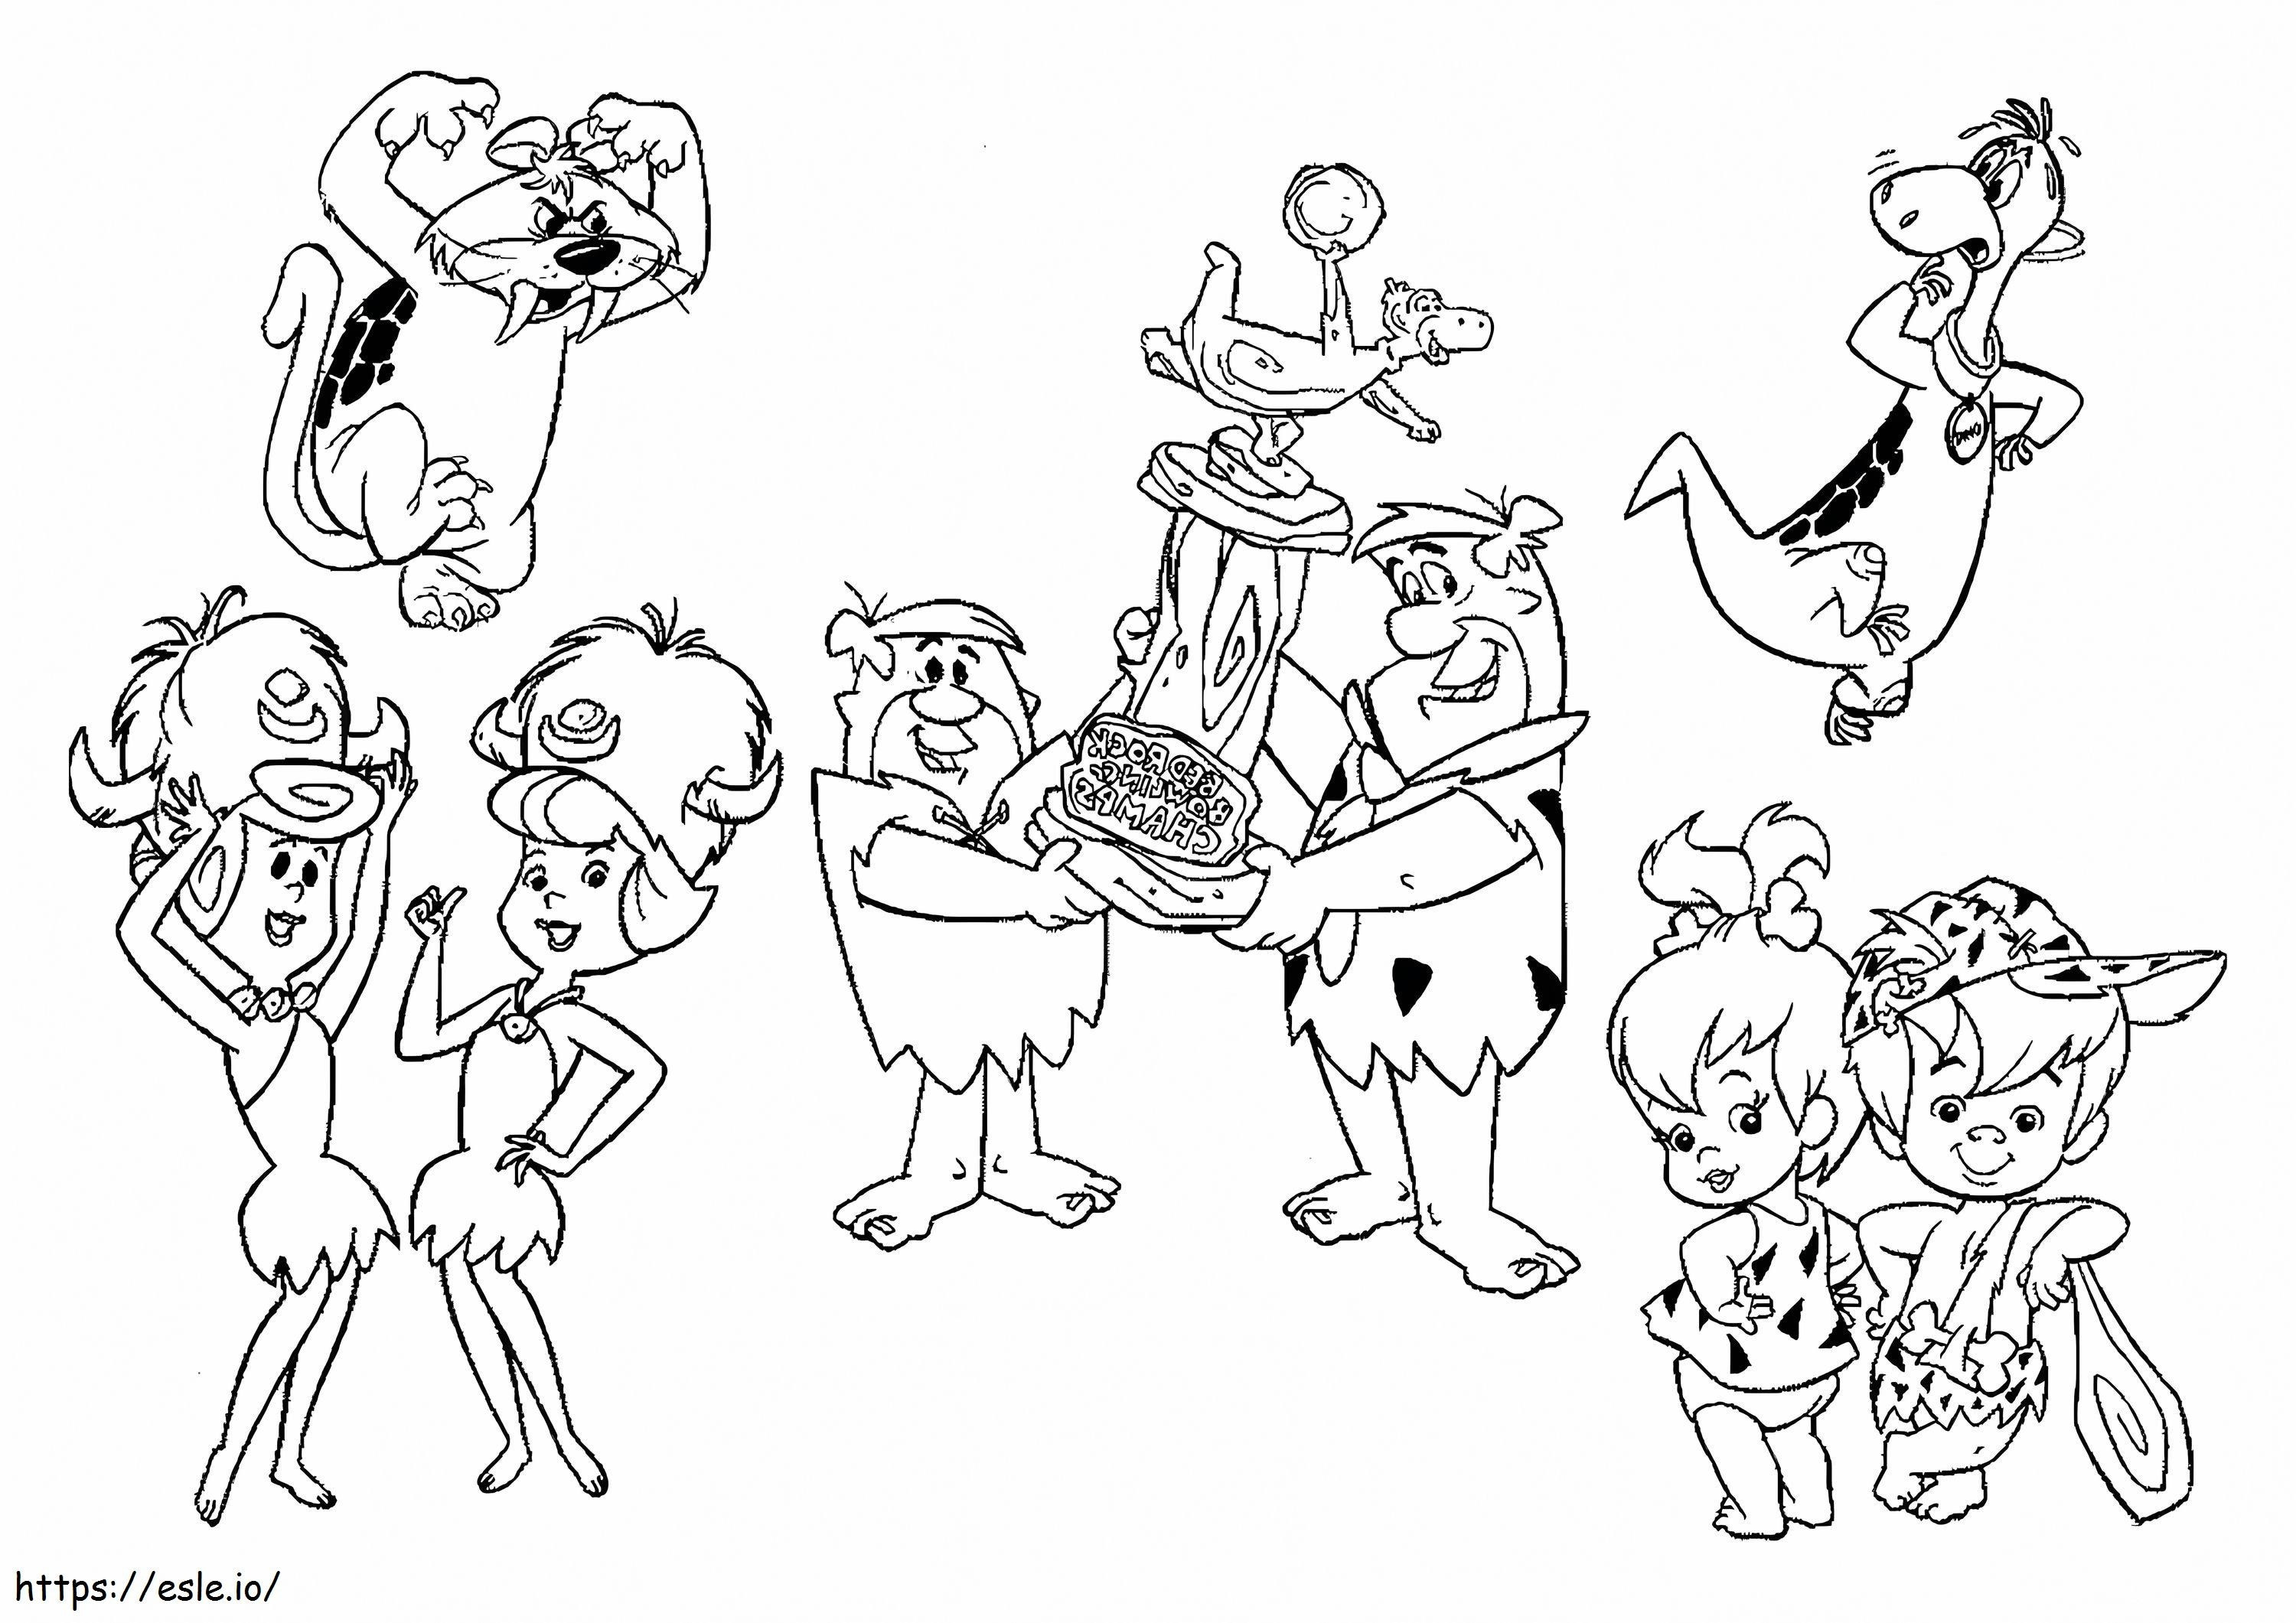 The Flintstones Characters coloring page